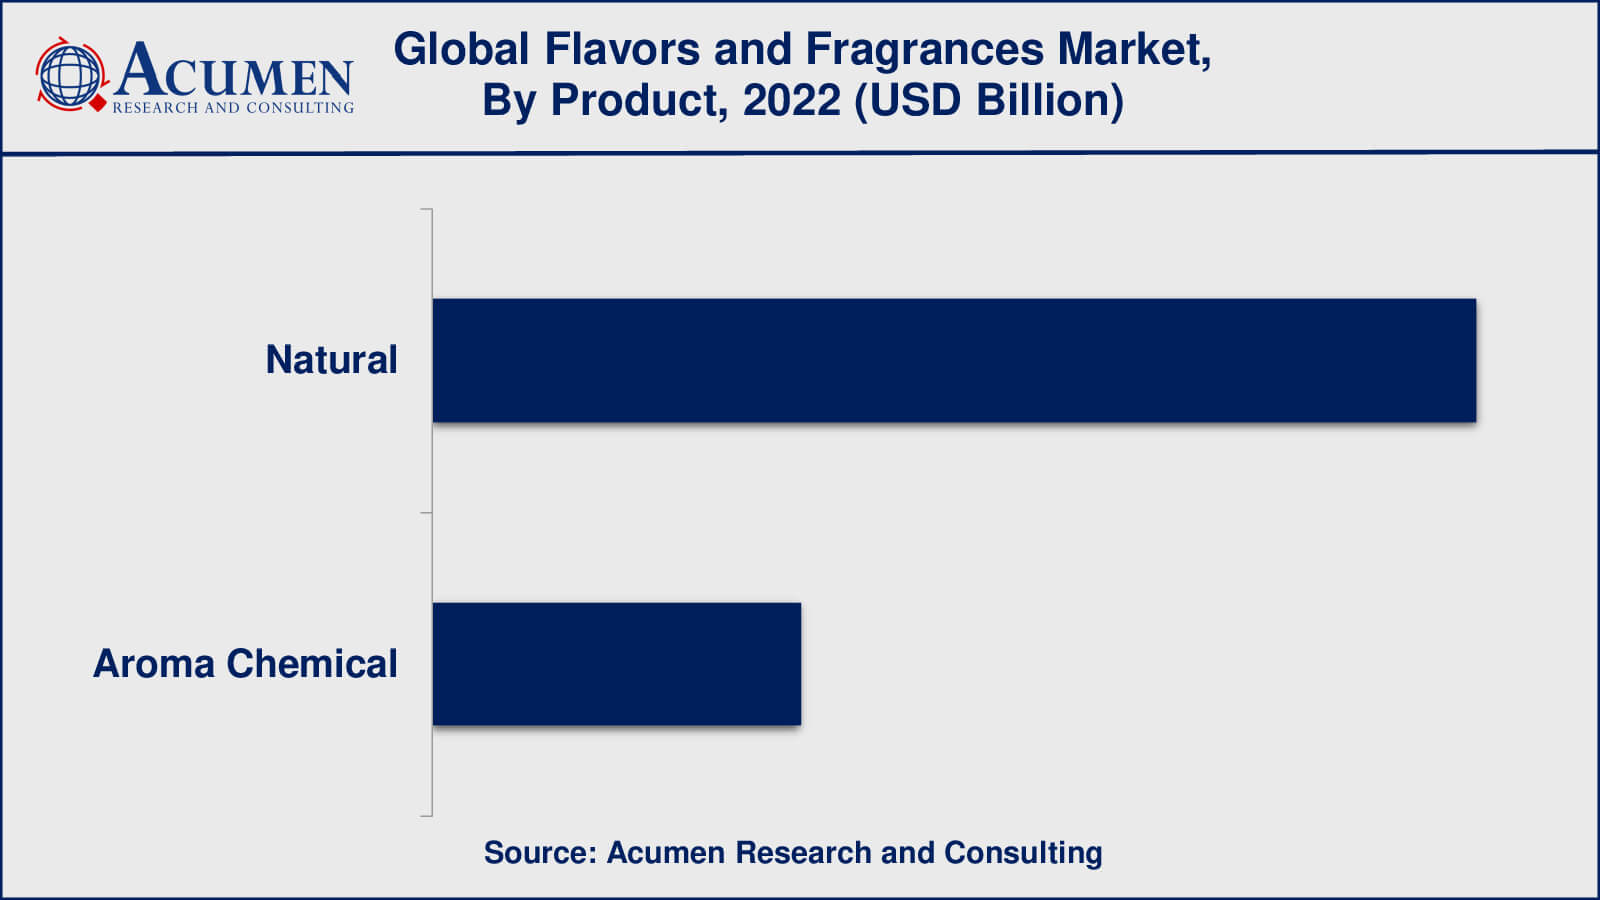 Flavors and Fragrances Market Drivers